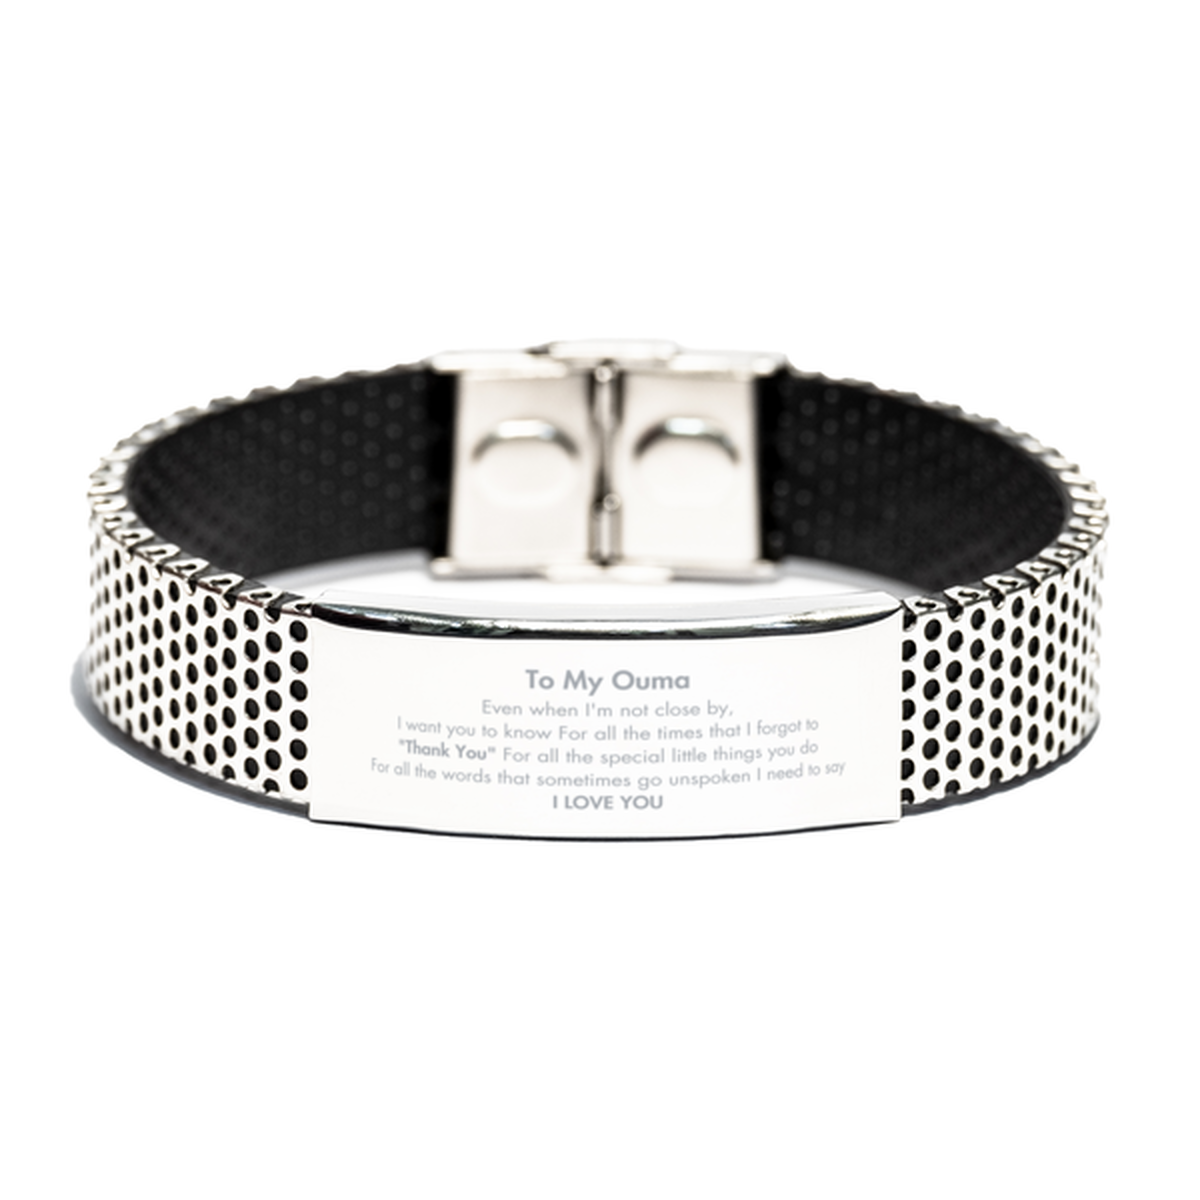 Thank You Gifts for Ouma, Keepsake Stainless Steel Bracelet Gifts for Ouma Birthday Mother's day Father's Day Ouma For all the words That sometimes go unspoken I need to say I LOVE YOU